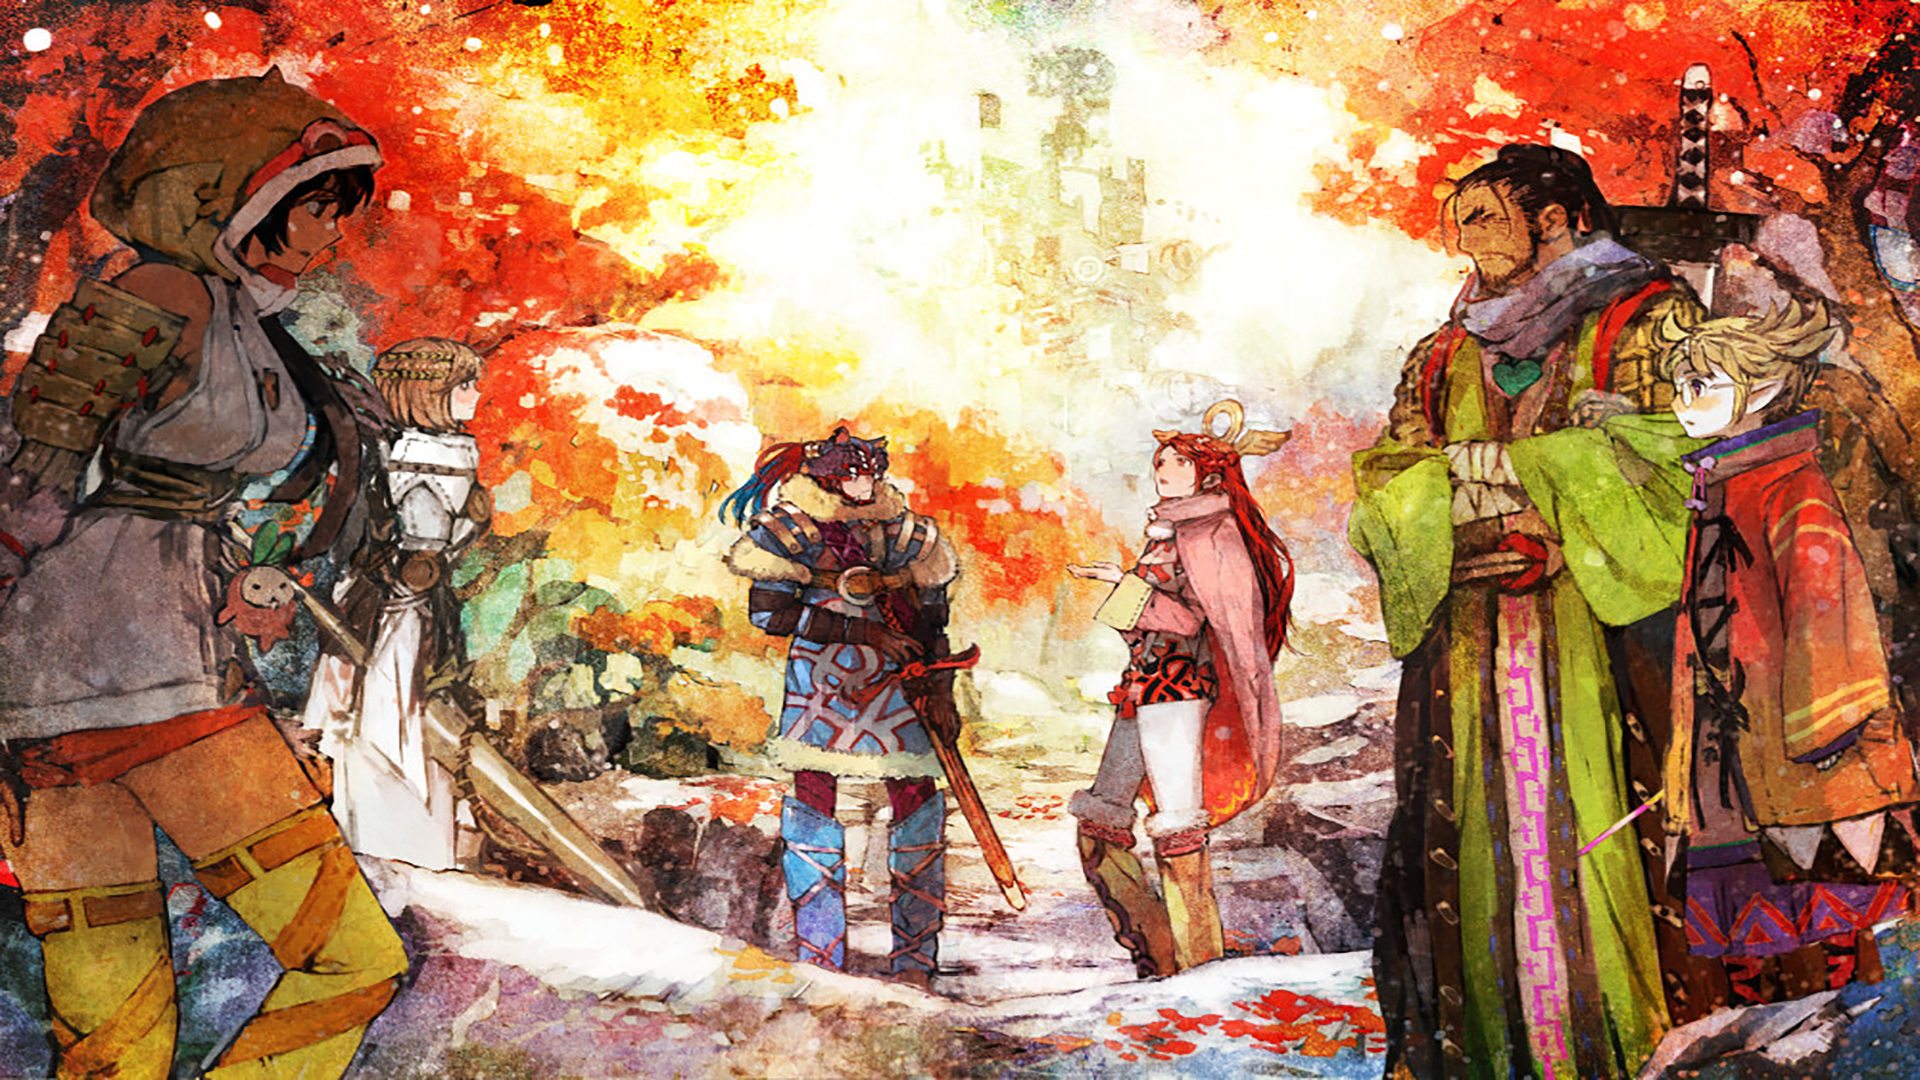 More information about "I am Setsuna Review: A Glimpse on Past Glory"